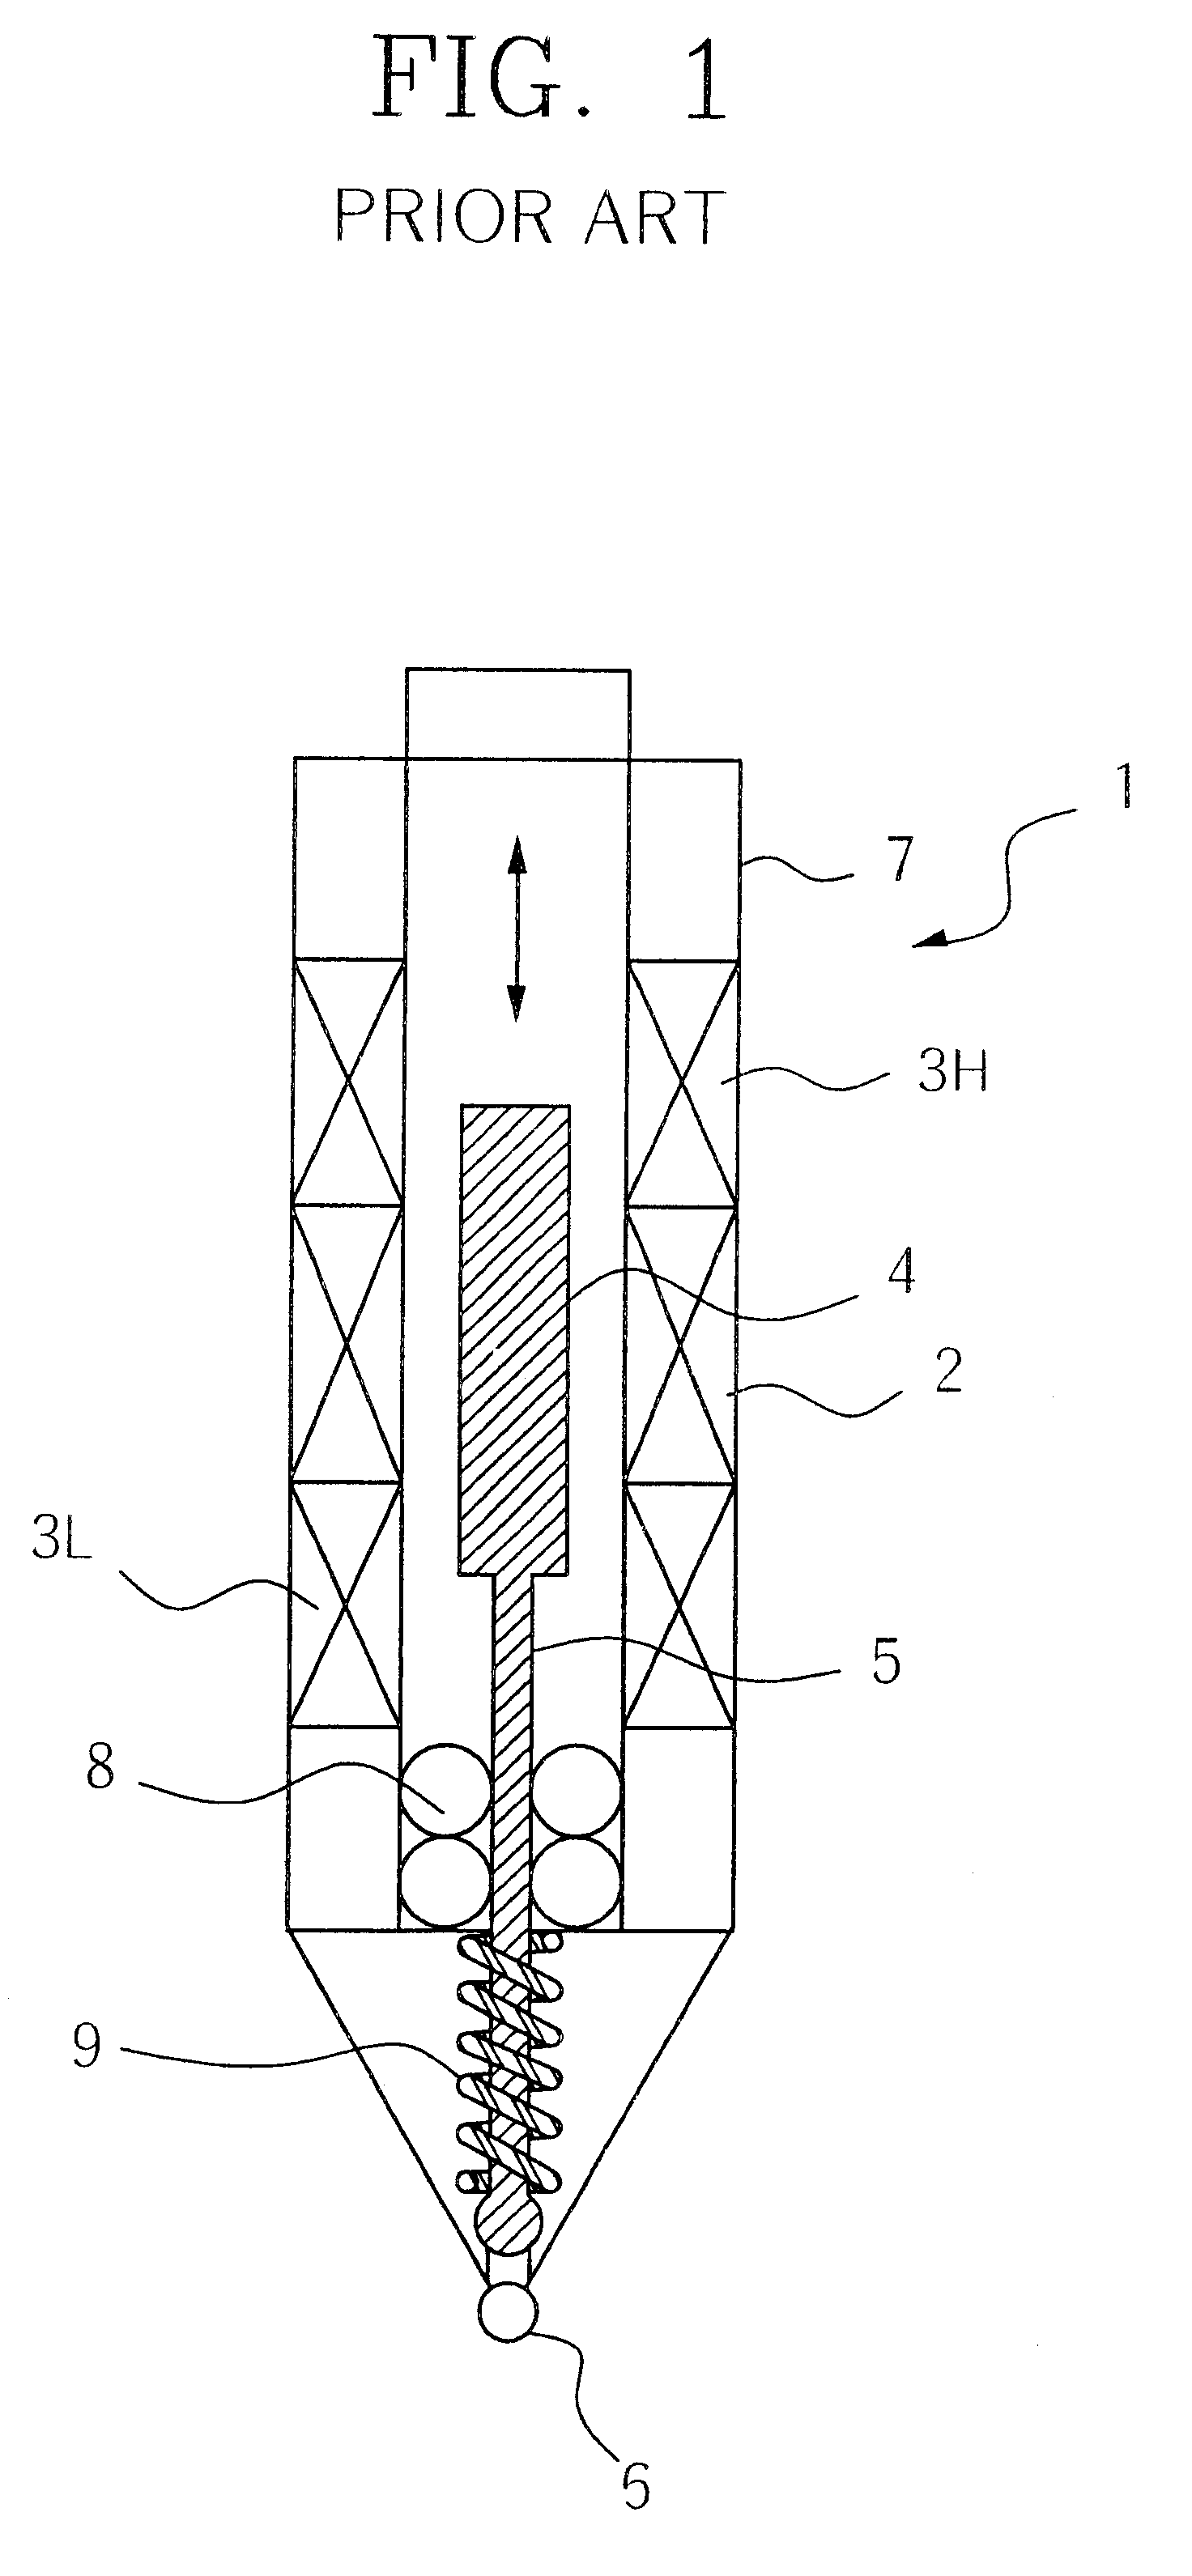 High sensitivity displacement measuring device using linear variable differential transformer